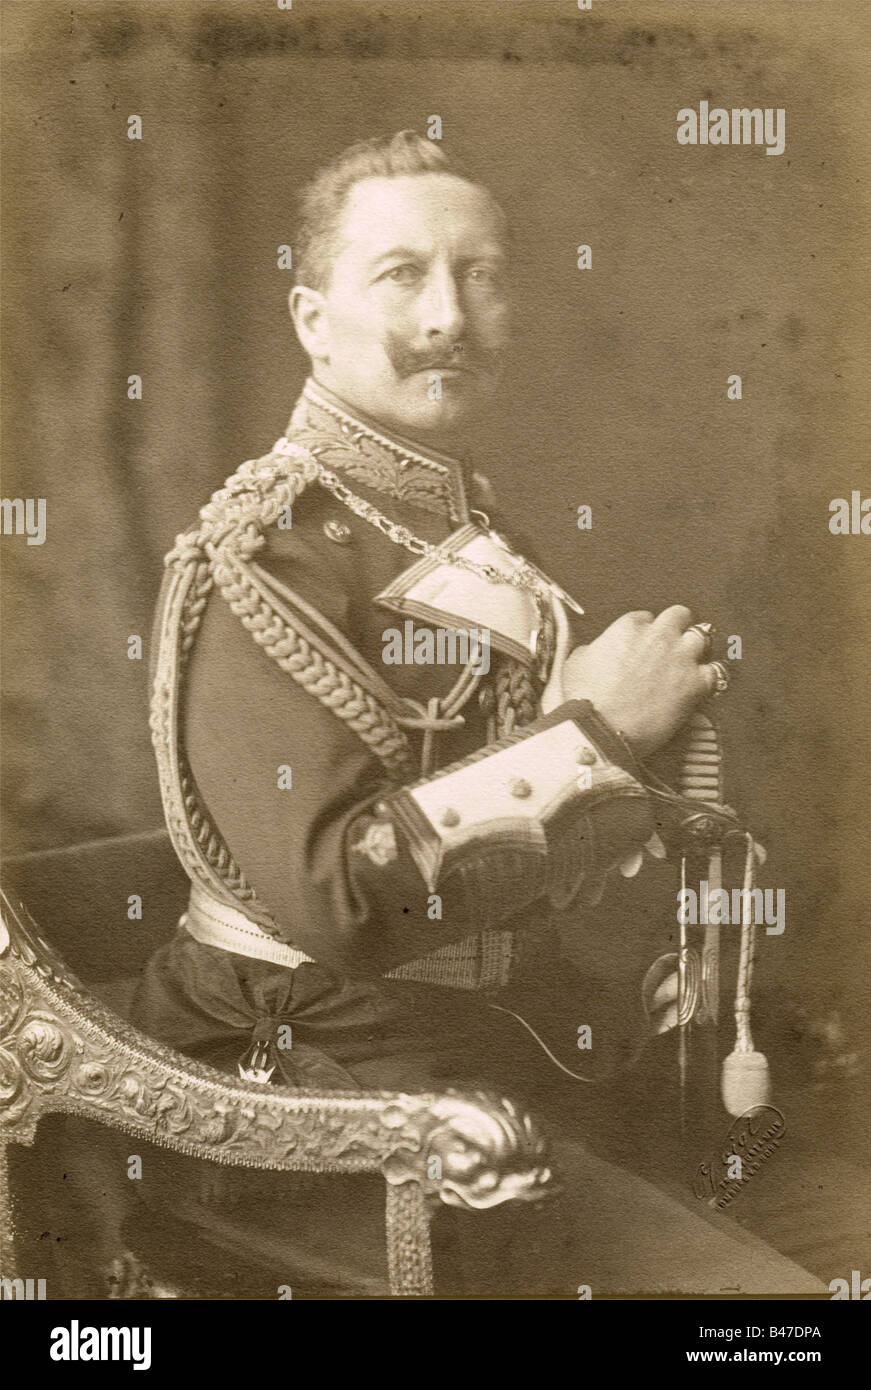 Kaiser Wilhelm II - an aiguillette for his Grand Admiral's uniform., A shoulder knot woven from twisted gold cord, divided into two woven strands, which terminate in crowned golden points. Superimposed with two crossed, gilded Grand Admiral's batons, enamelled red, and white, and with the crowned cipher 'W' on top, the insignia of an aide-de-camp to his grandfather, Wilhelm I. The gilding on the cord and the weave is somewhat worn and darkened. Dark blue cloth backing with two pins and a button-on attachment flap. At the request of the Imperial Navy, Wilhelm II, Stock Photo